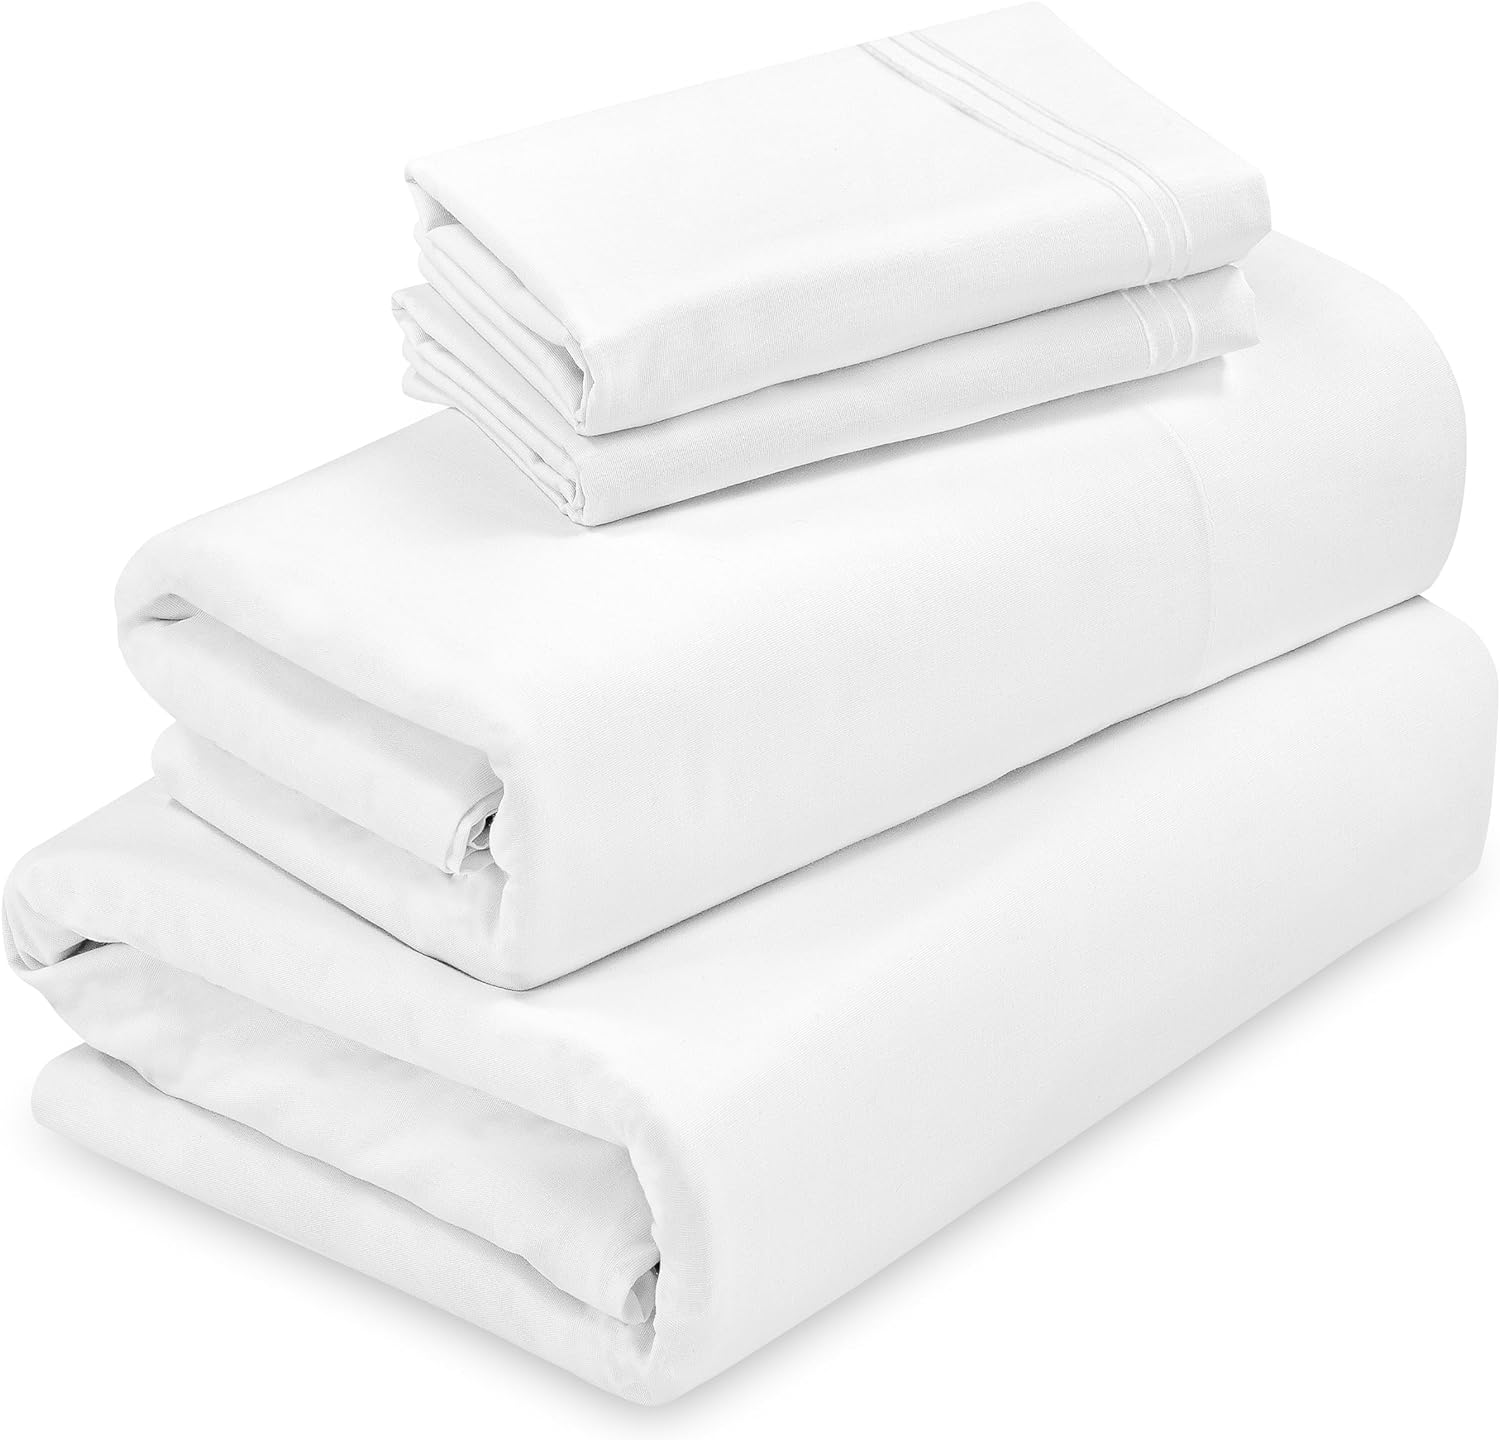 ROYALE LINENS - 4 Piece Bed Sheet - Soft Brushed Microfiber 1800 Bedding Set - 1 Fitted Sheet, 1 Flat Sheet, 2 Pillow Cases - Wrinkle & Fade Resistant Luxury Queen Size (White)